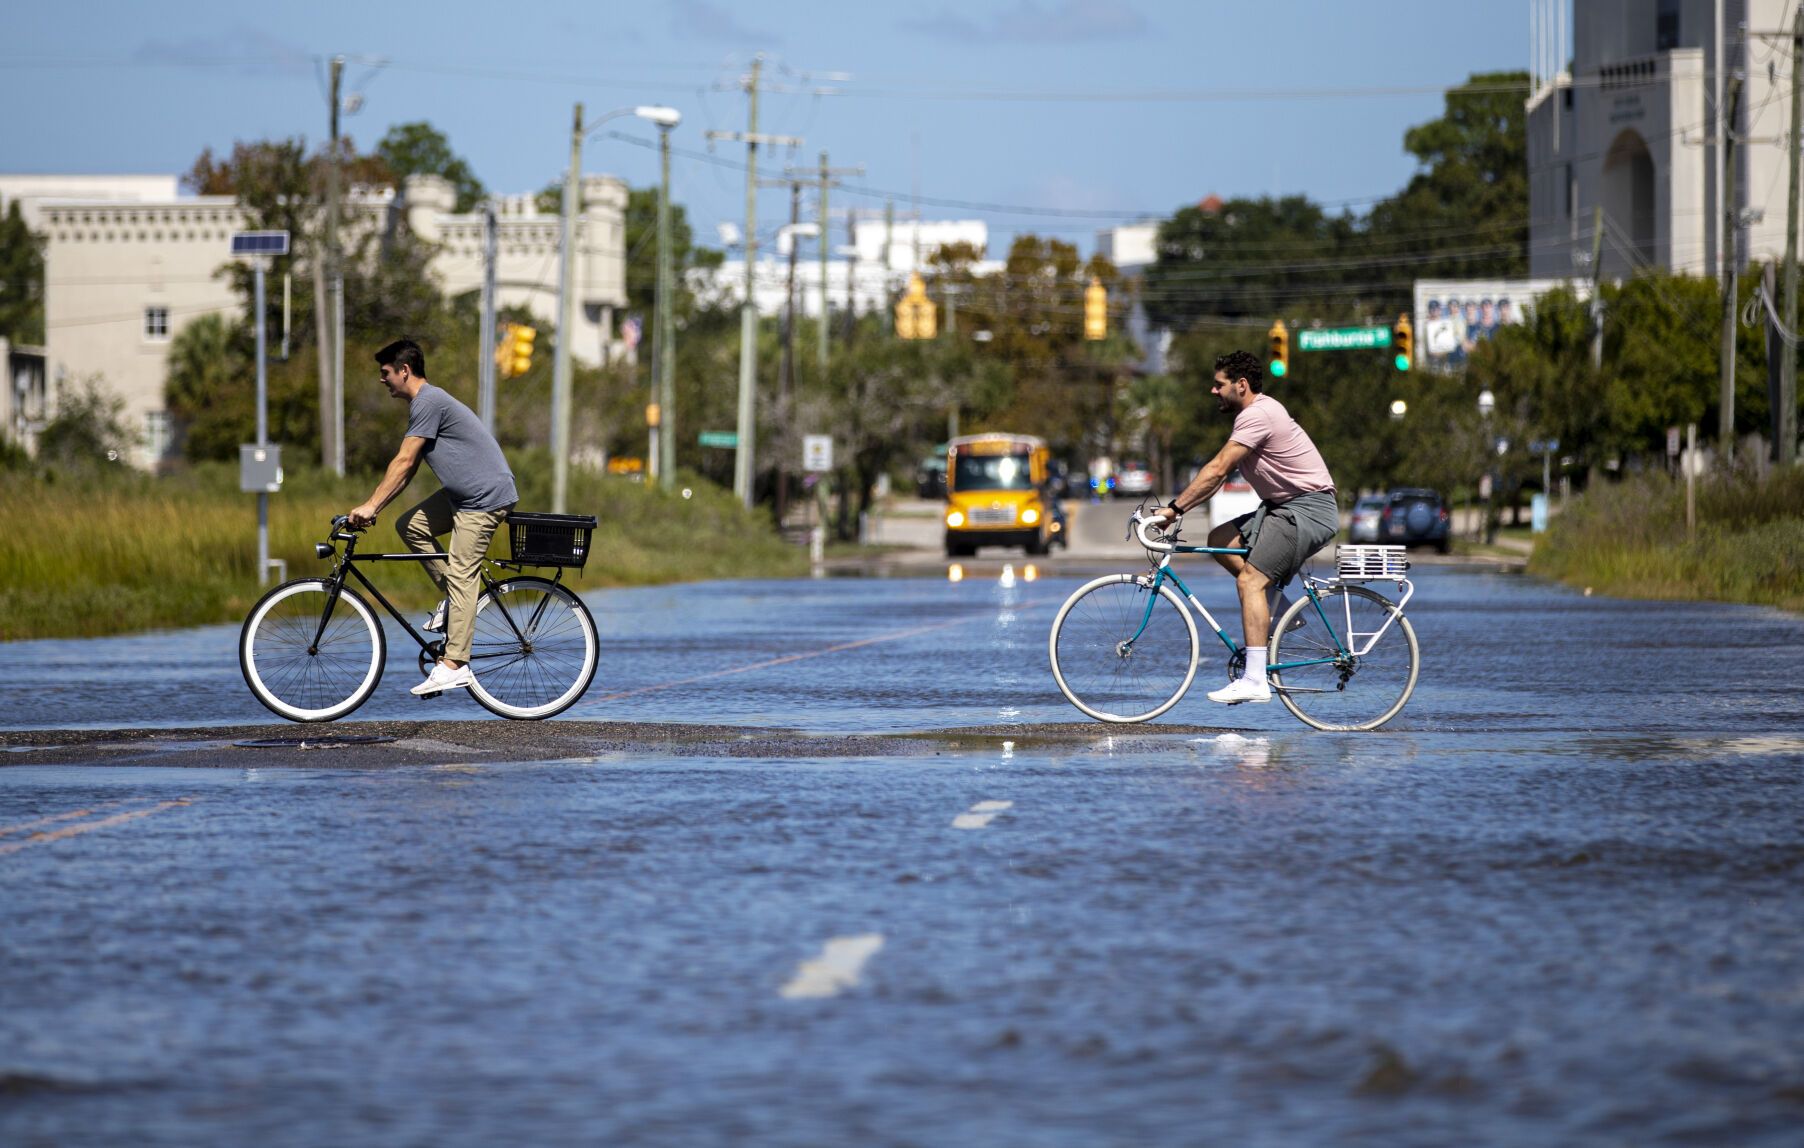 Bicyclists pedal through floodwater at the intersection of Hagood Avenue and Line Street on Monday, Sept. 21, 2020, in Charleston. Image by Andrew J. Whitaker / Post and Courier. United States, 2020.